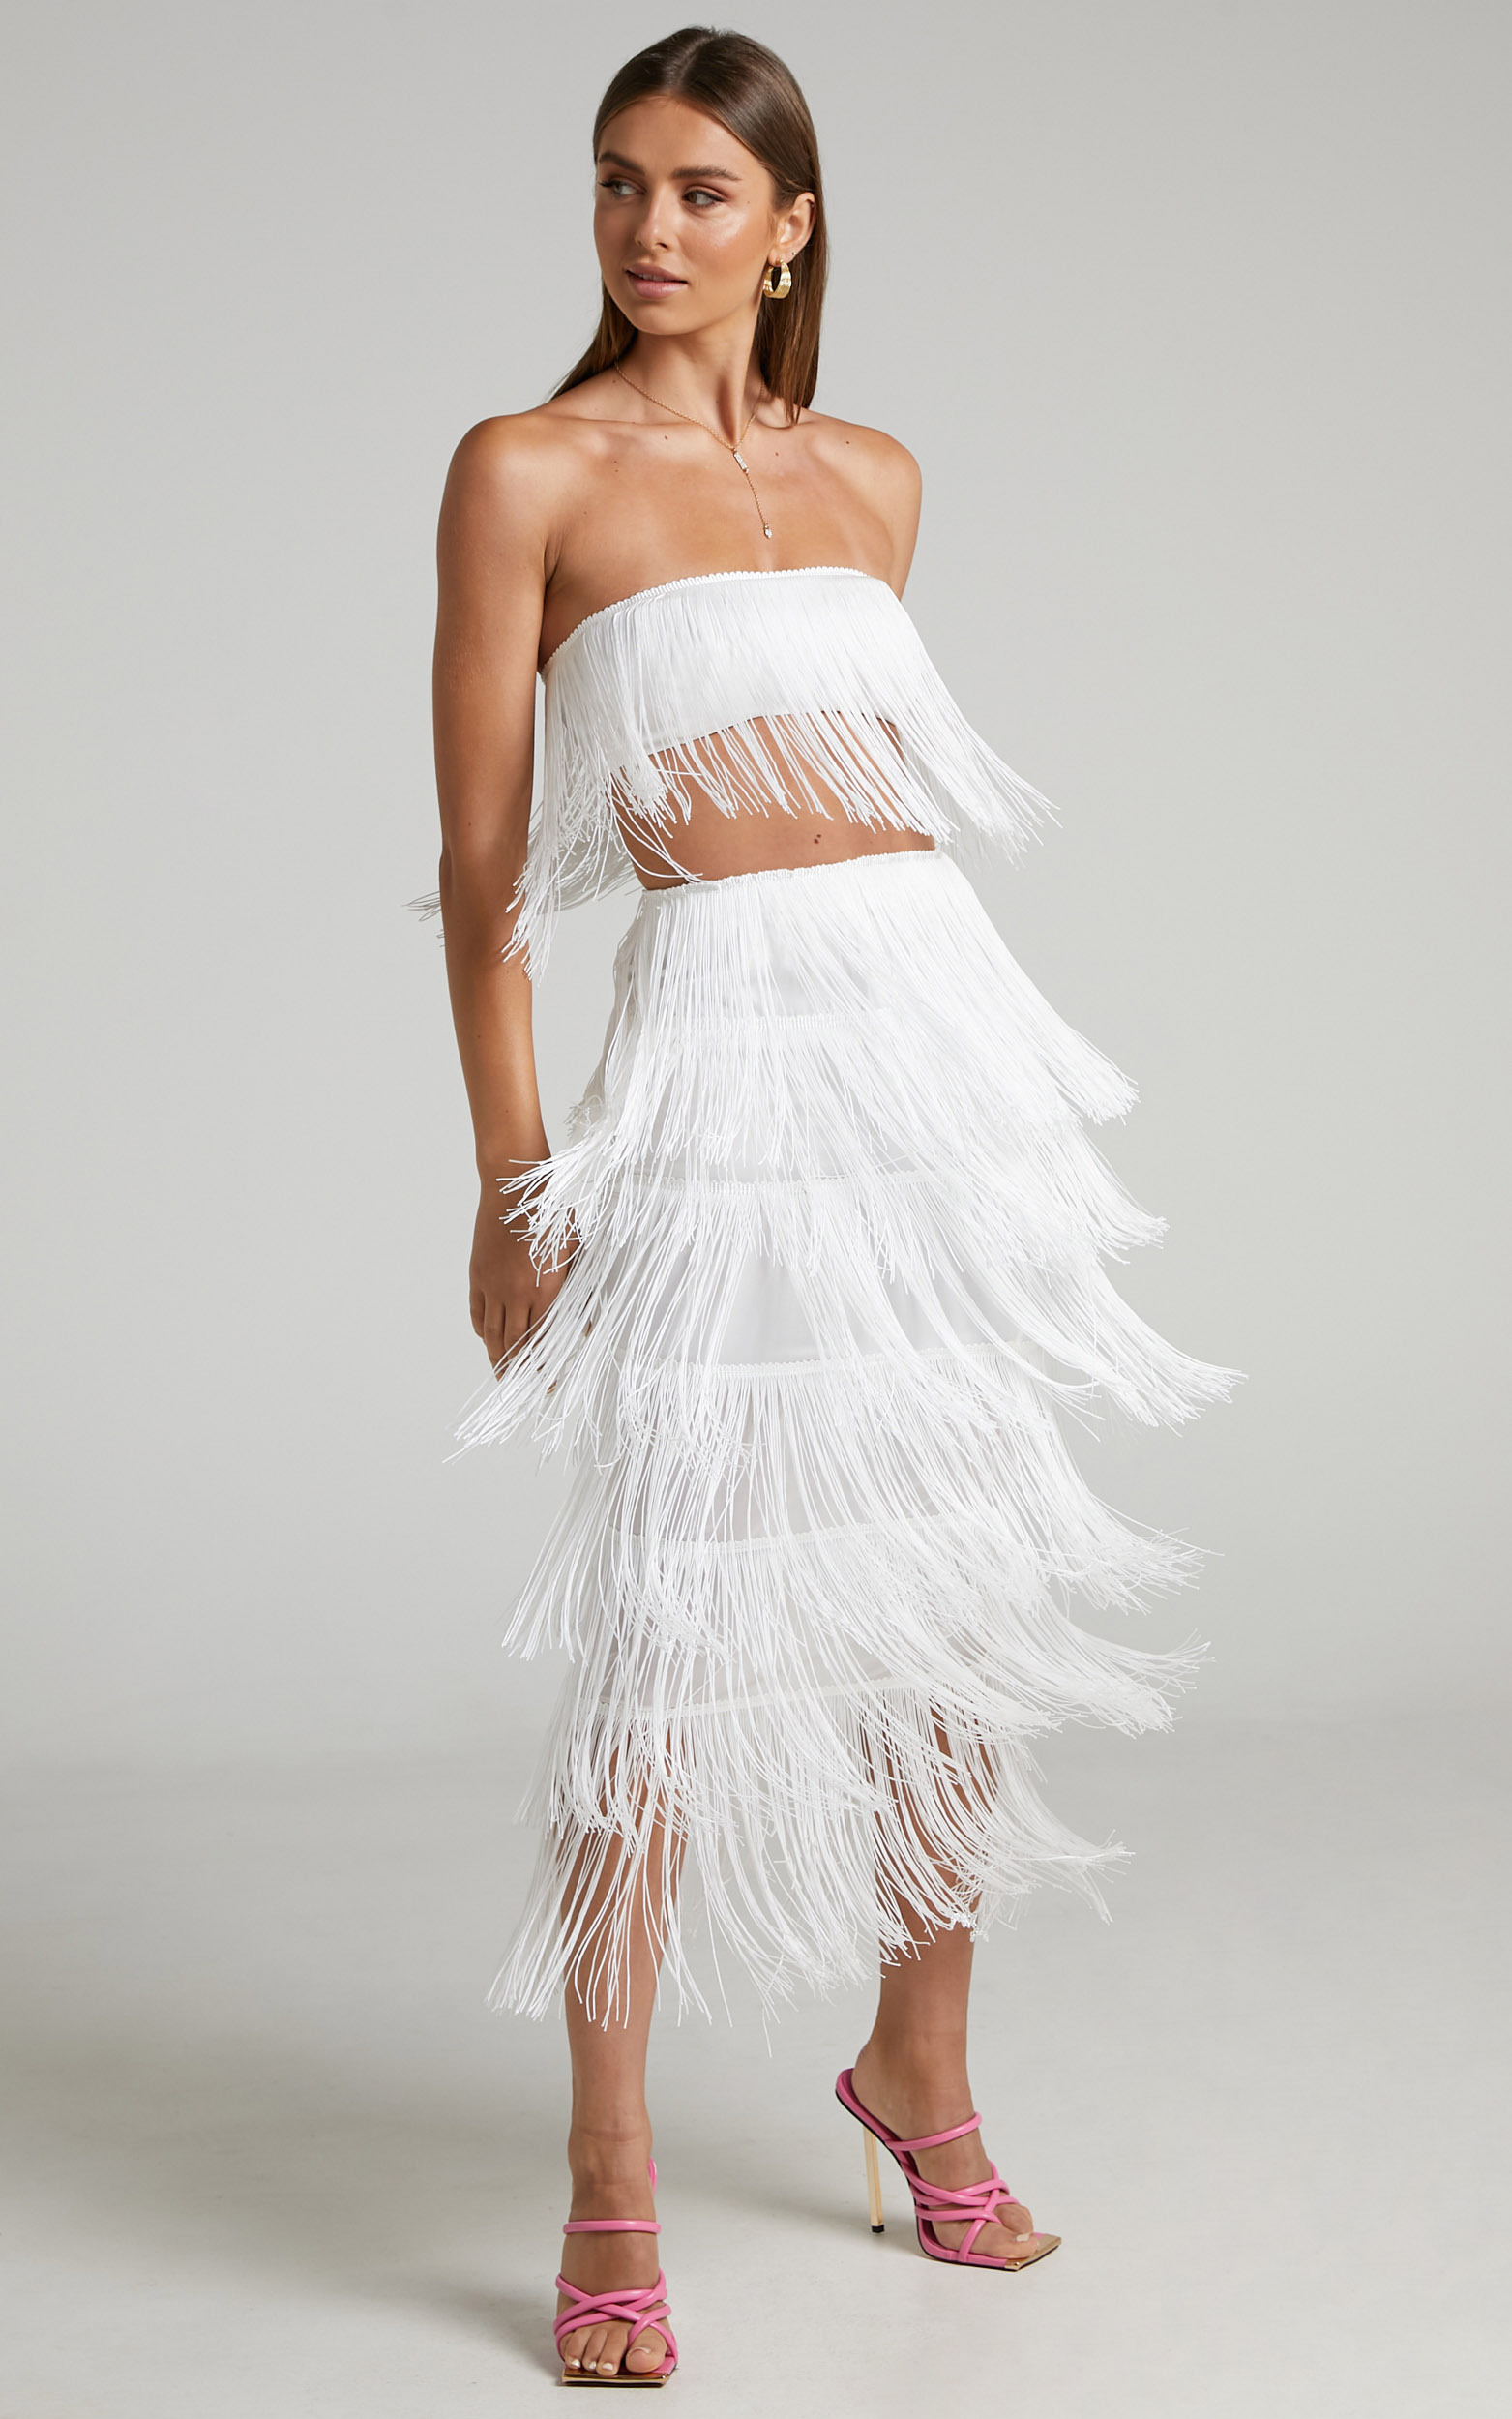 Amalee Fringe Two Piece Skirt Set in White - 04, WHT2, hi-res image number null